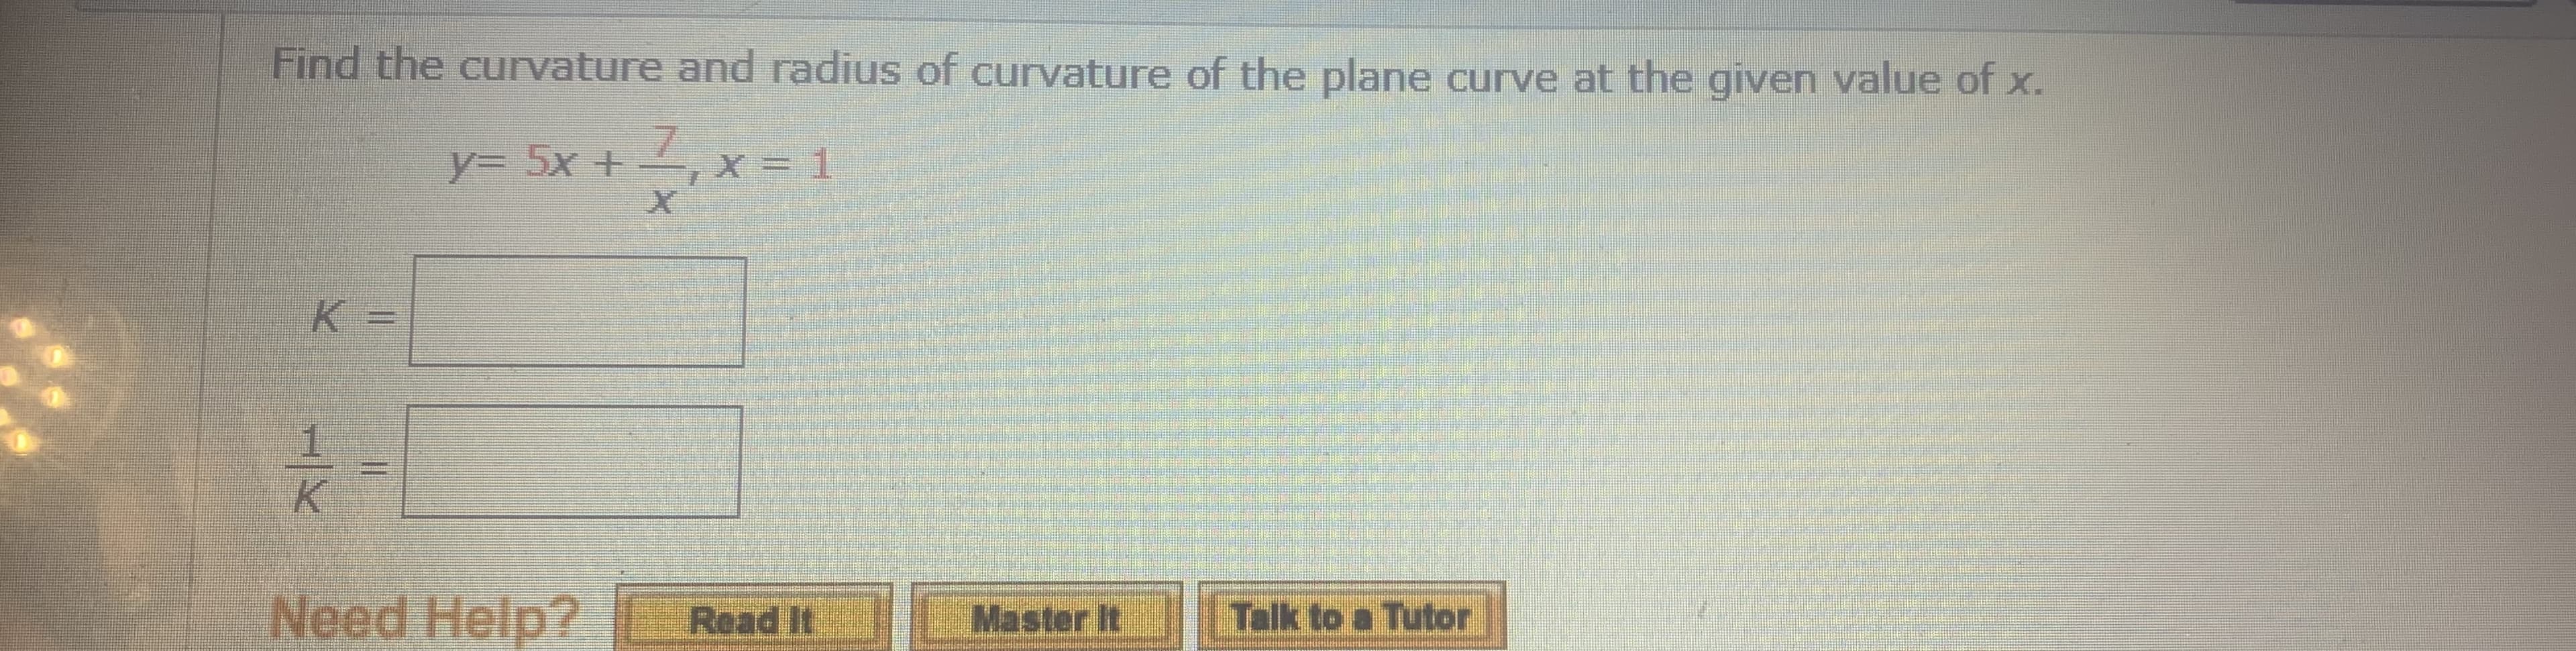 Find the currvature and radius of curvature of the plane curve at the given value of x.
y%3D 5x+
7.
X= 1
K =
%3D
1/K
